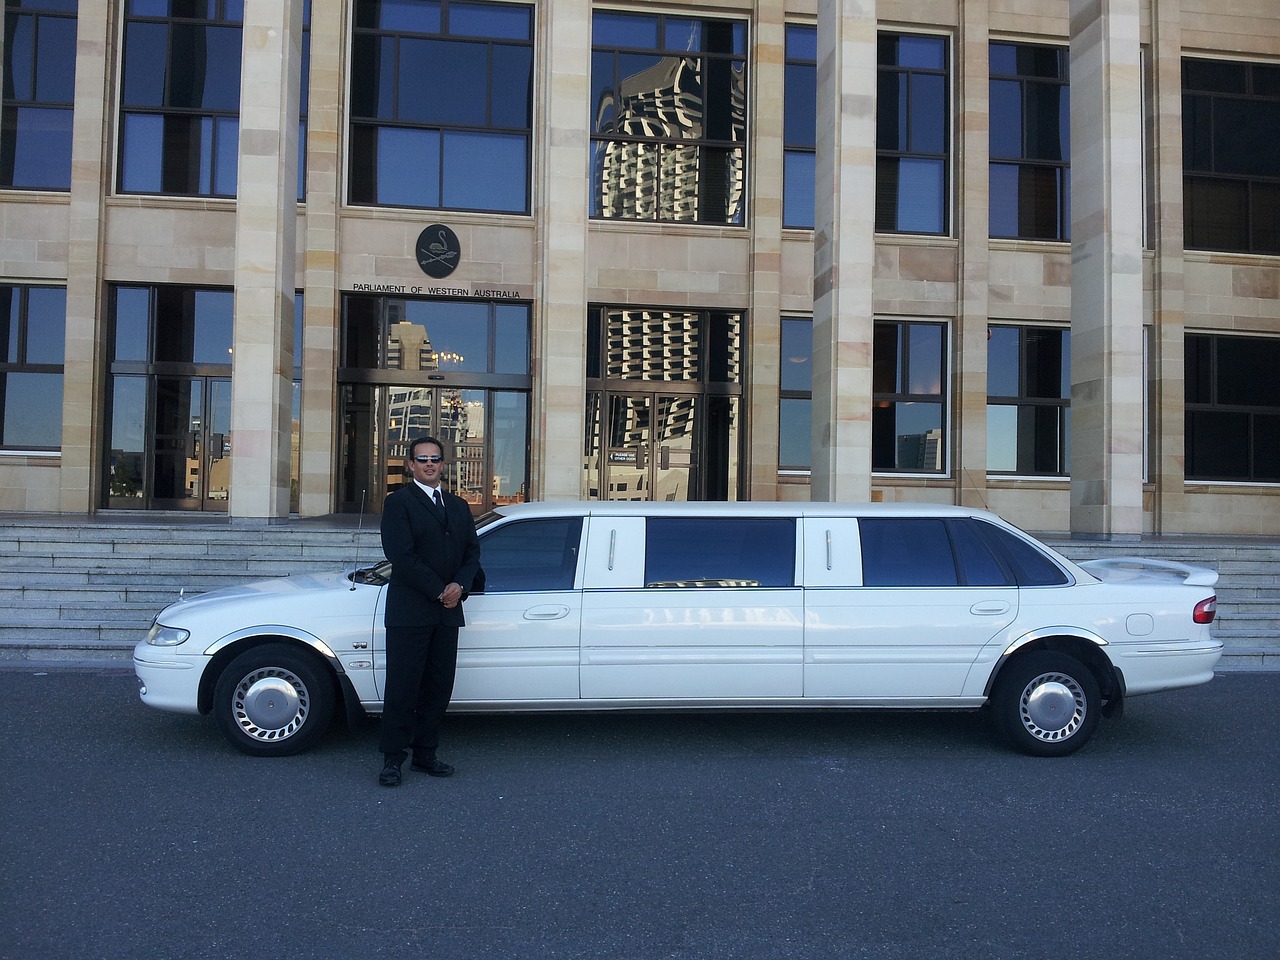 From Airport Transfers to Wedding Dreams: Sarasota Limo Services Have You Covered